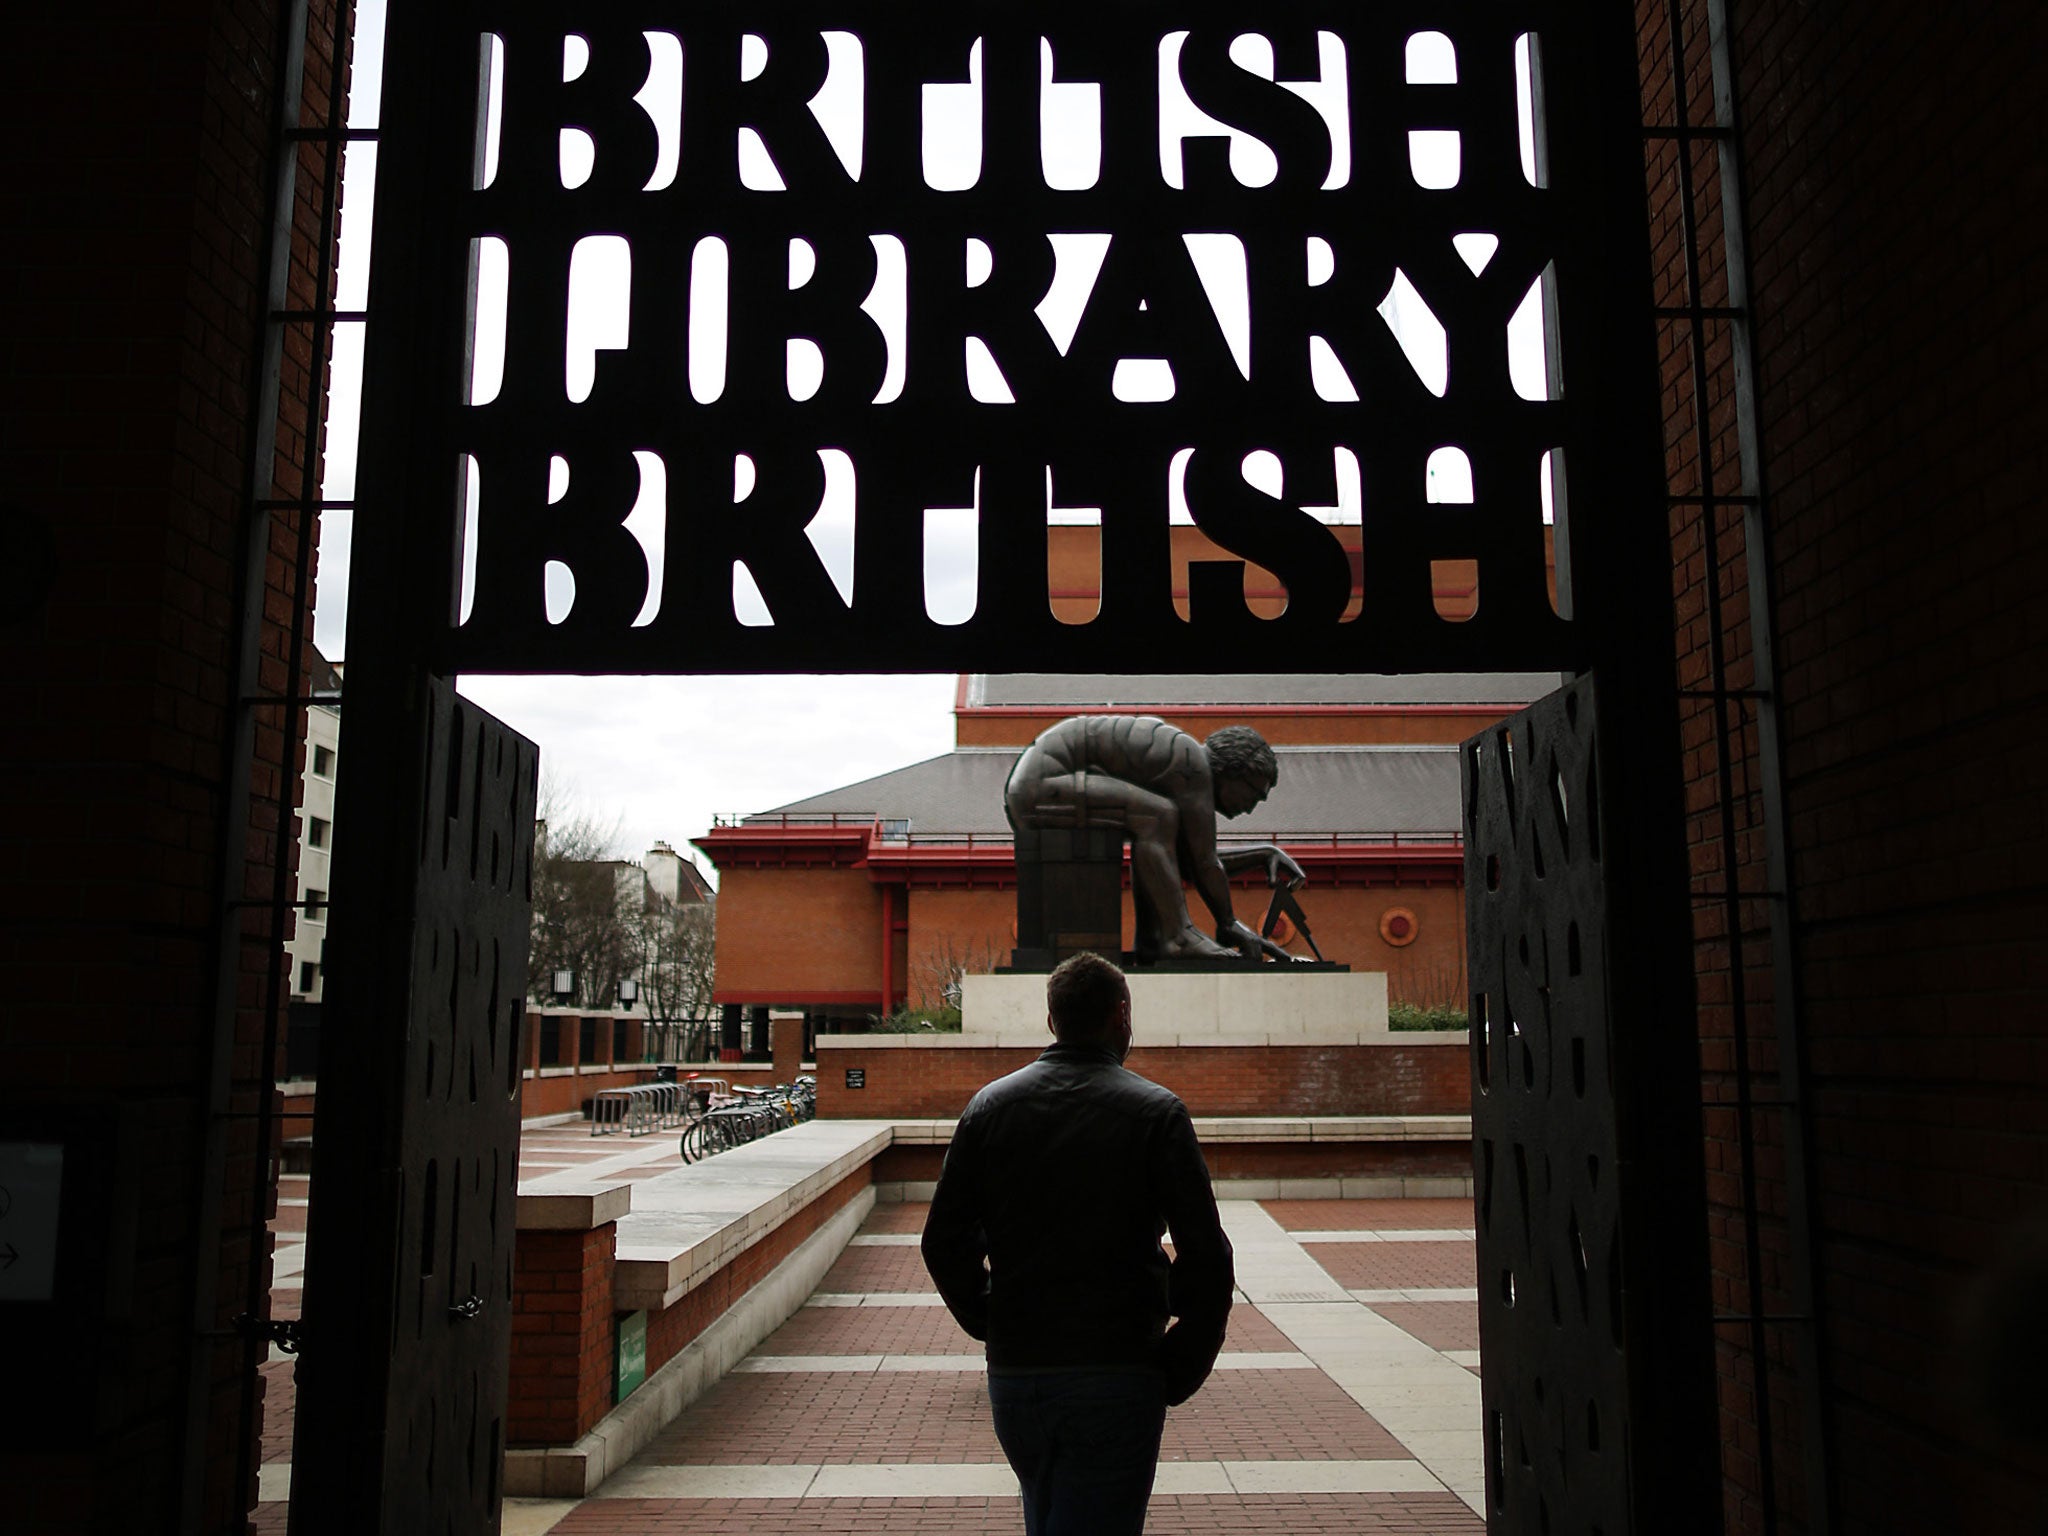 Access phd thesis british library